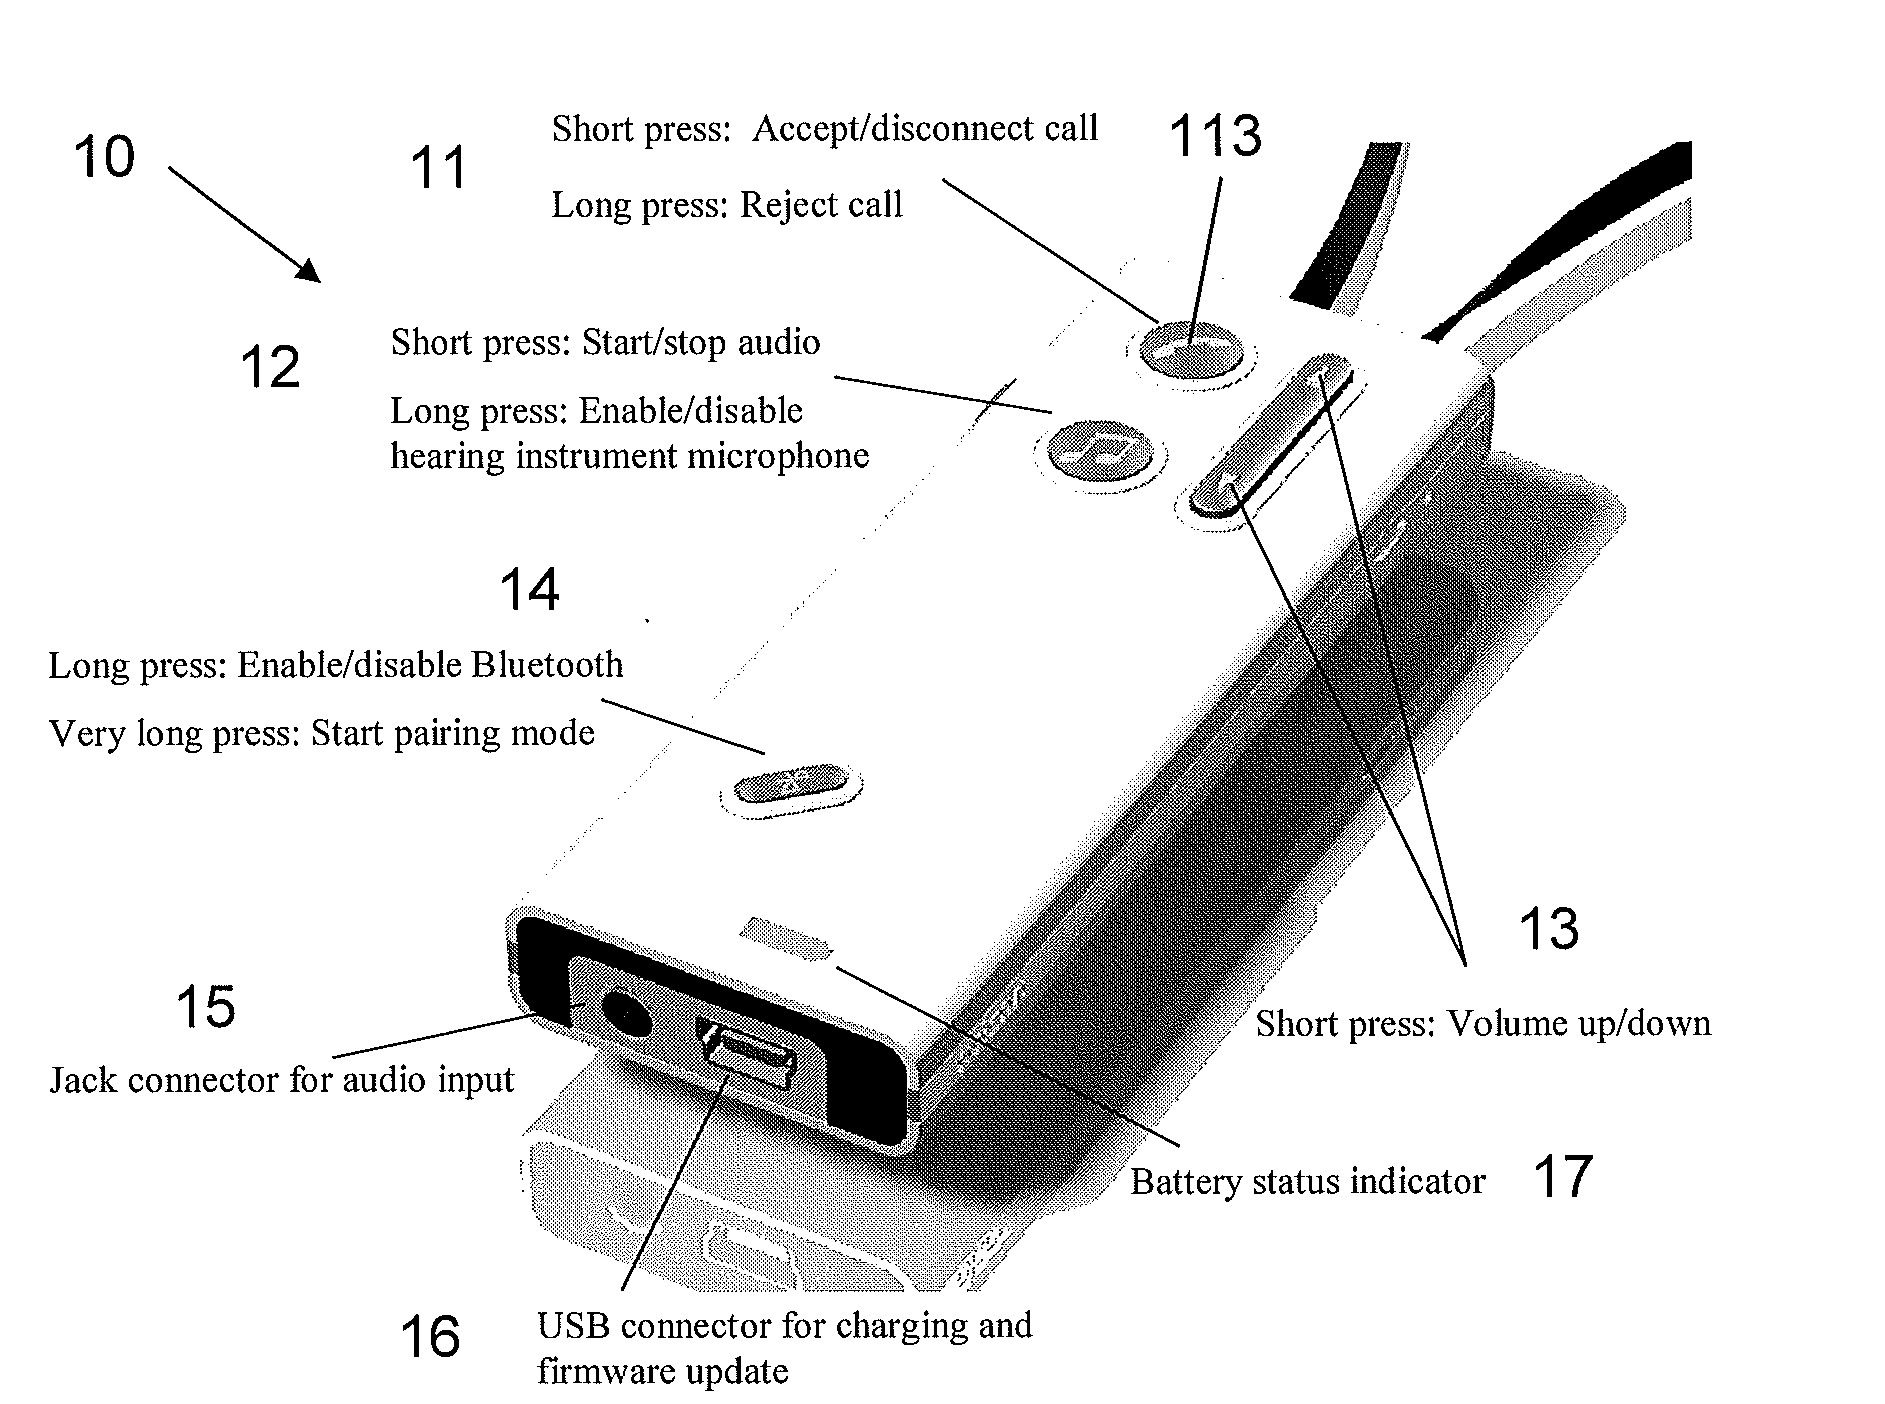 User interface for a communications device